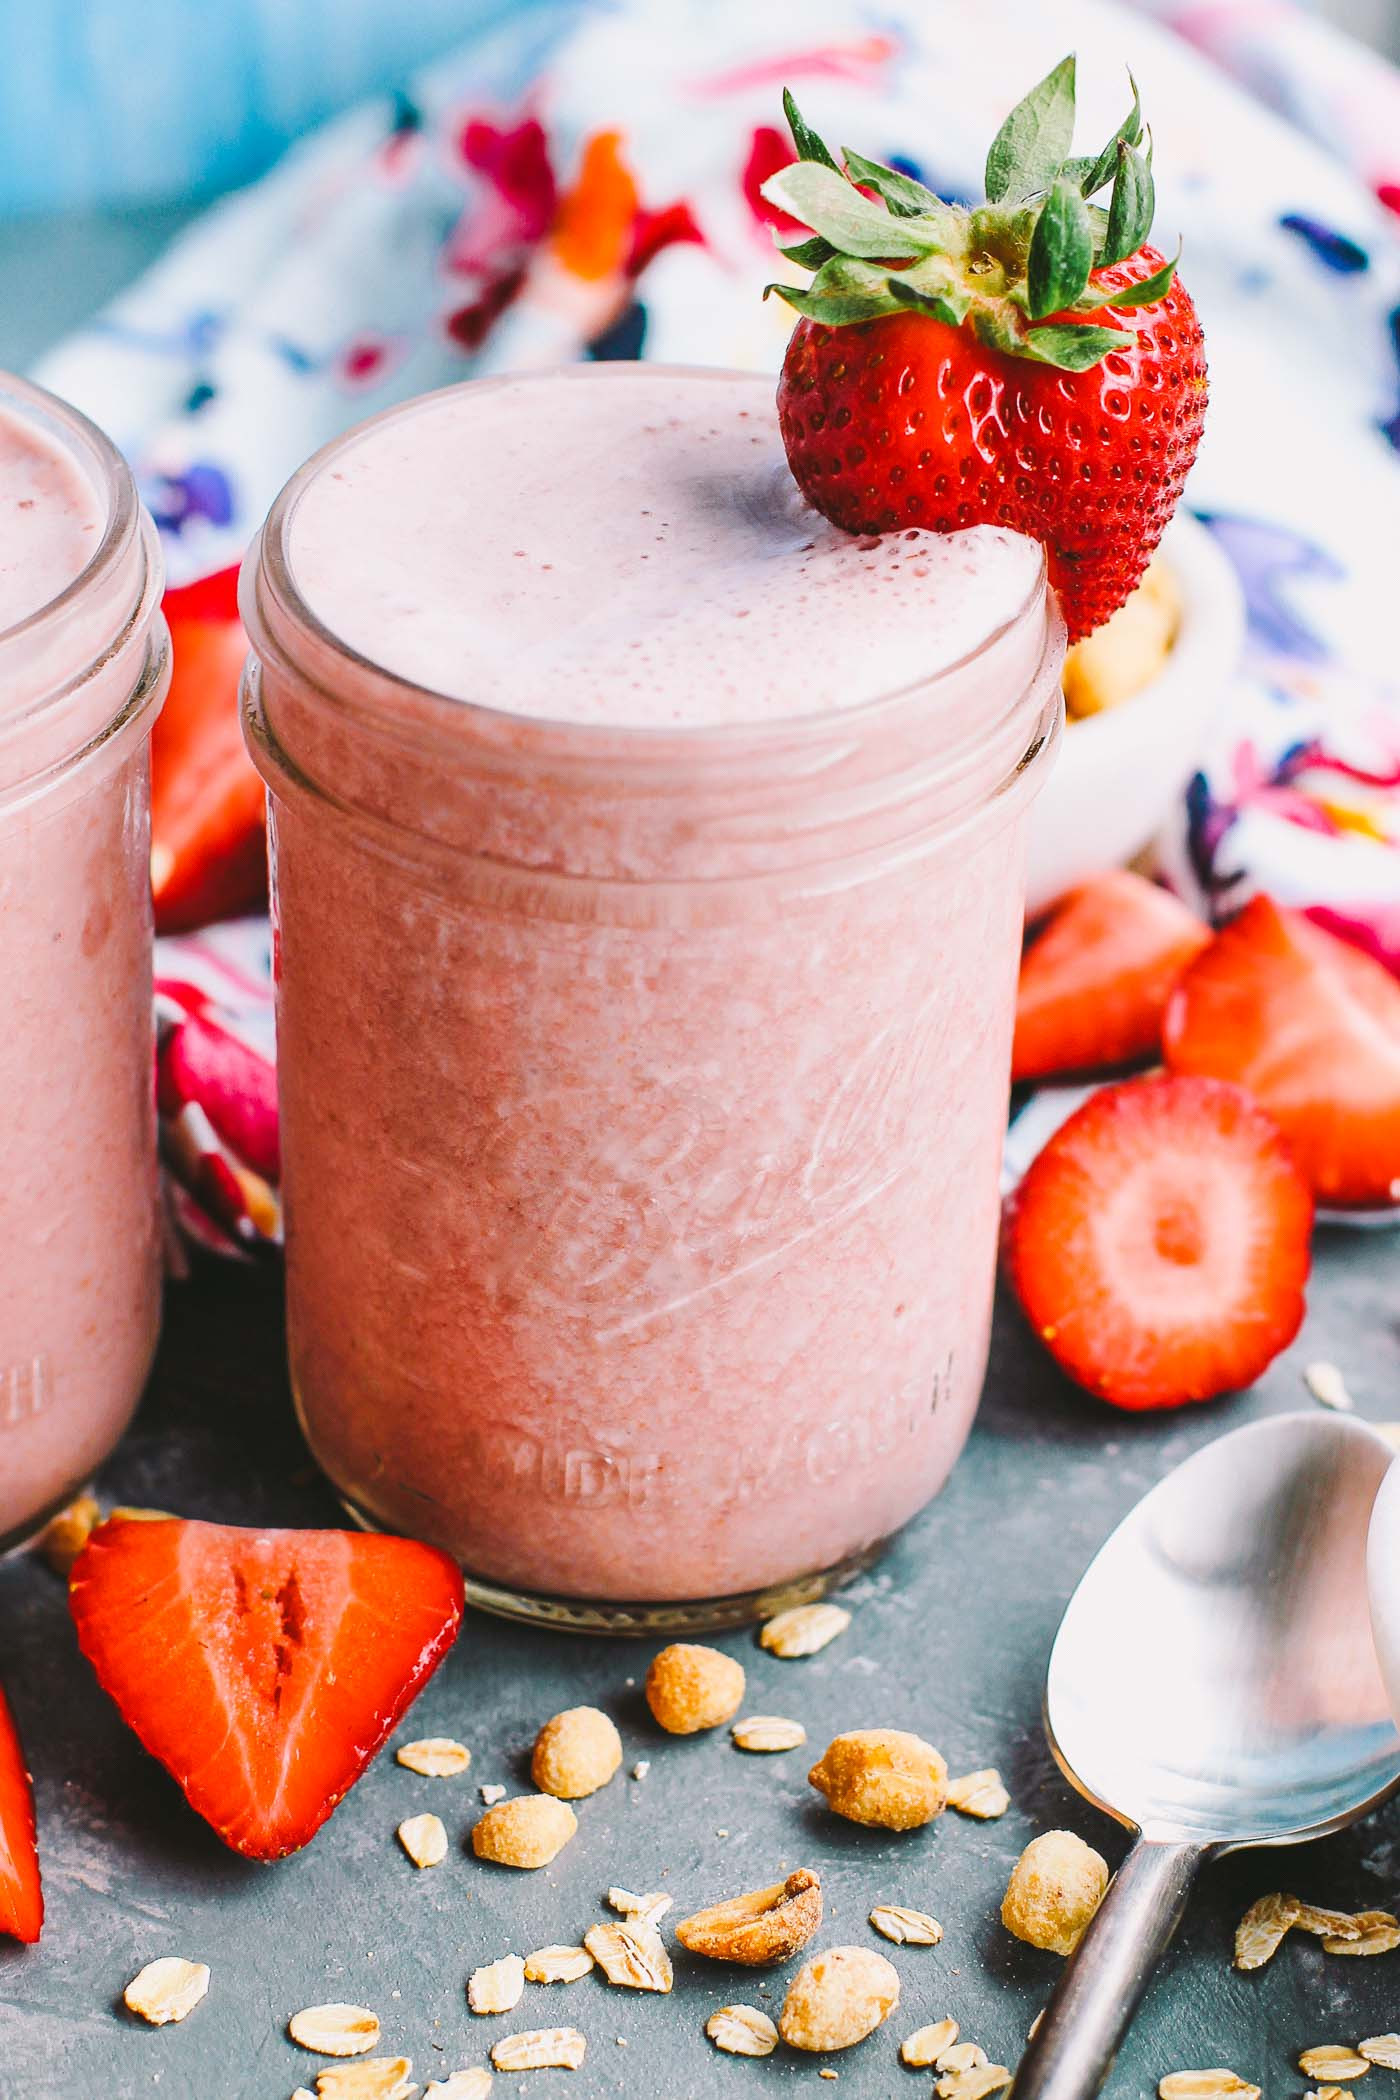 Easy Healthy Breakfast Smoothies
 strawberry pb&j protein smoothies plays well with butter